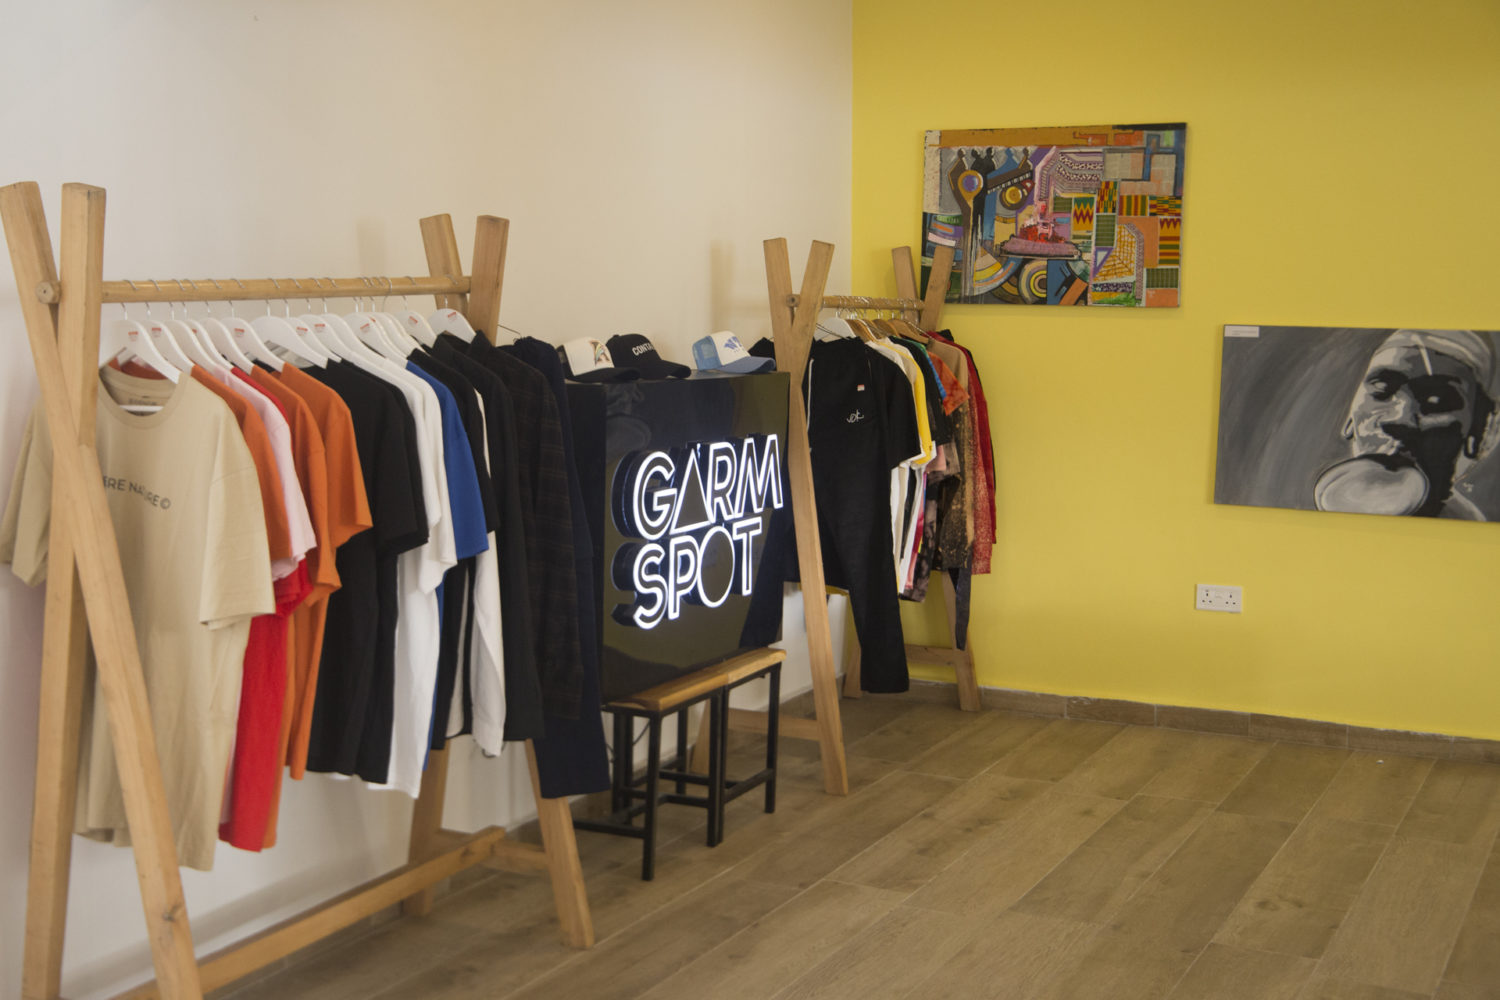 Lagos to Accra – Garmspot Hosts its First Pop-up Event in Accra!